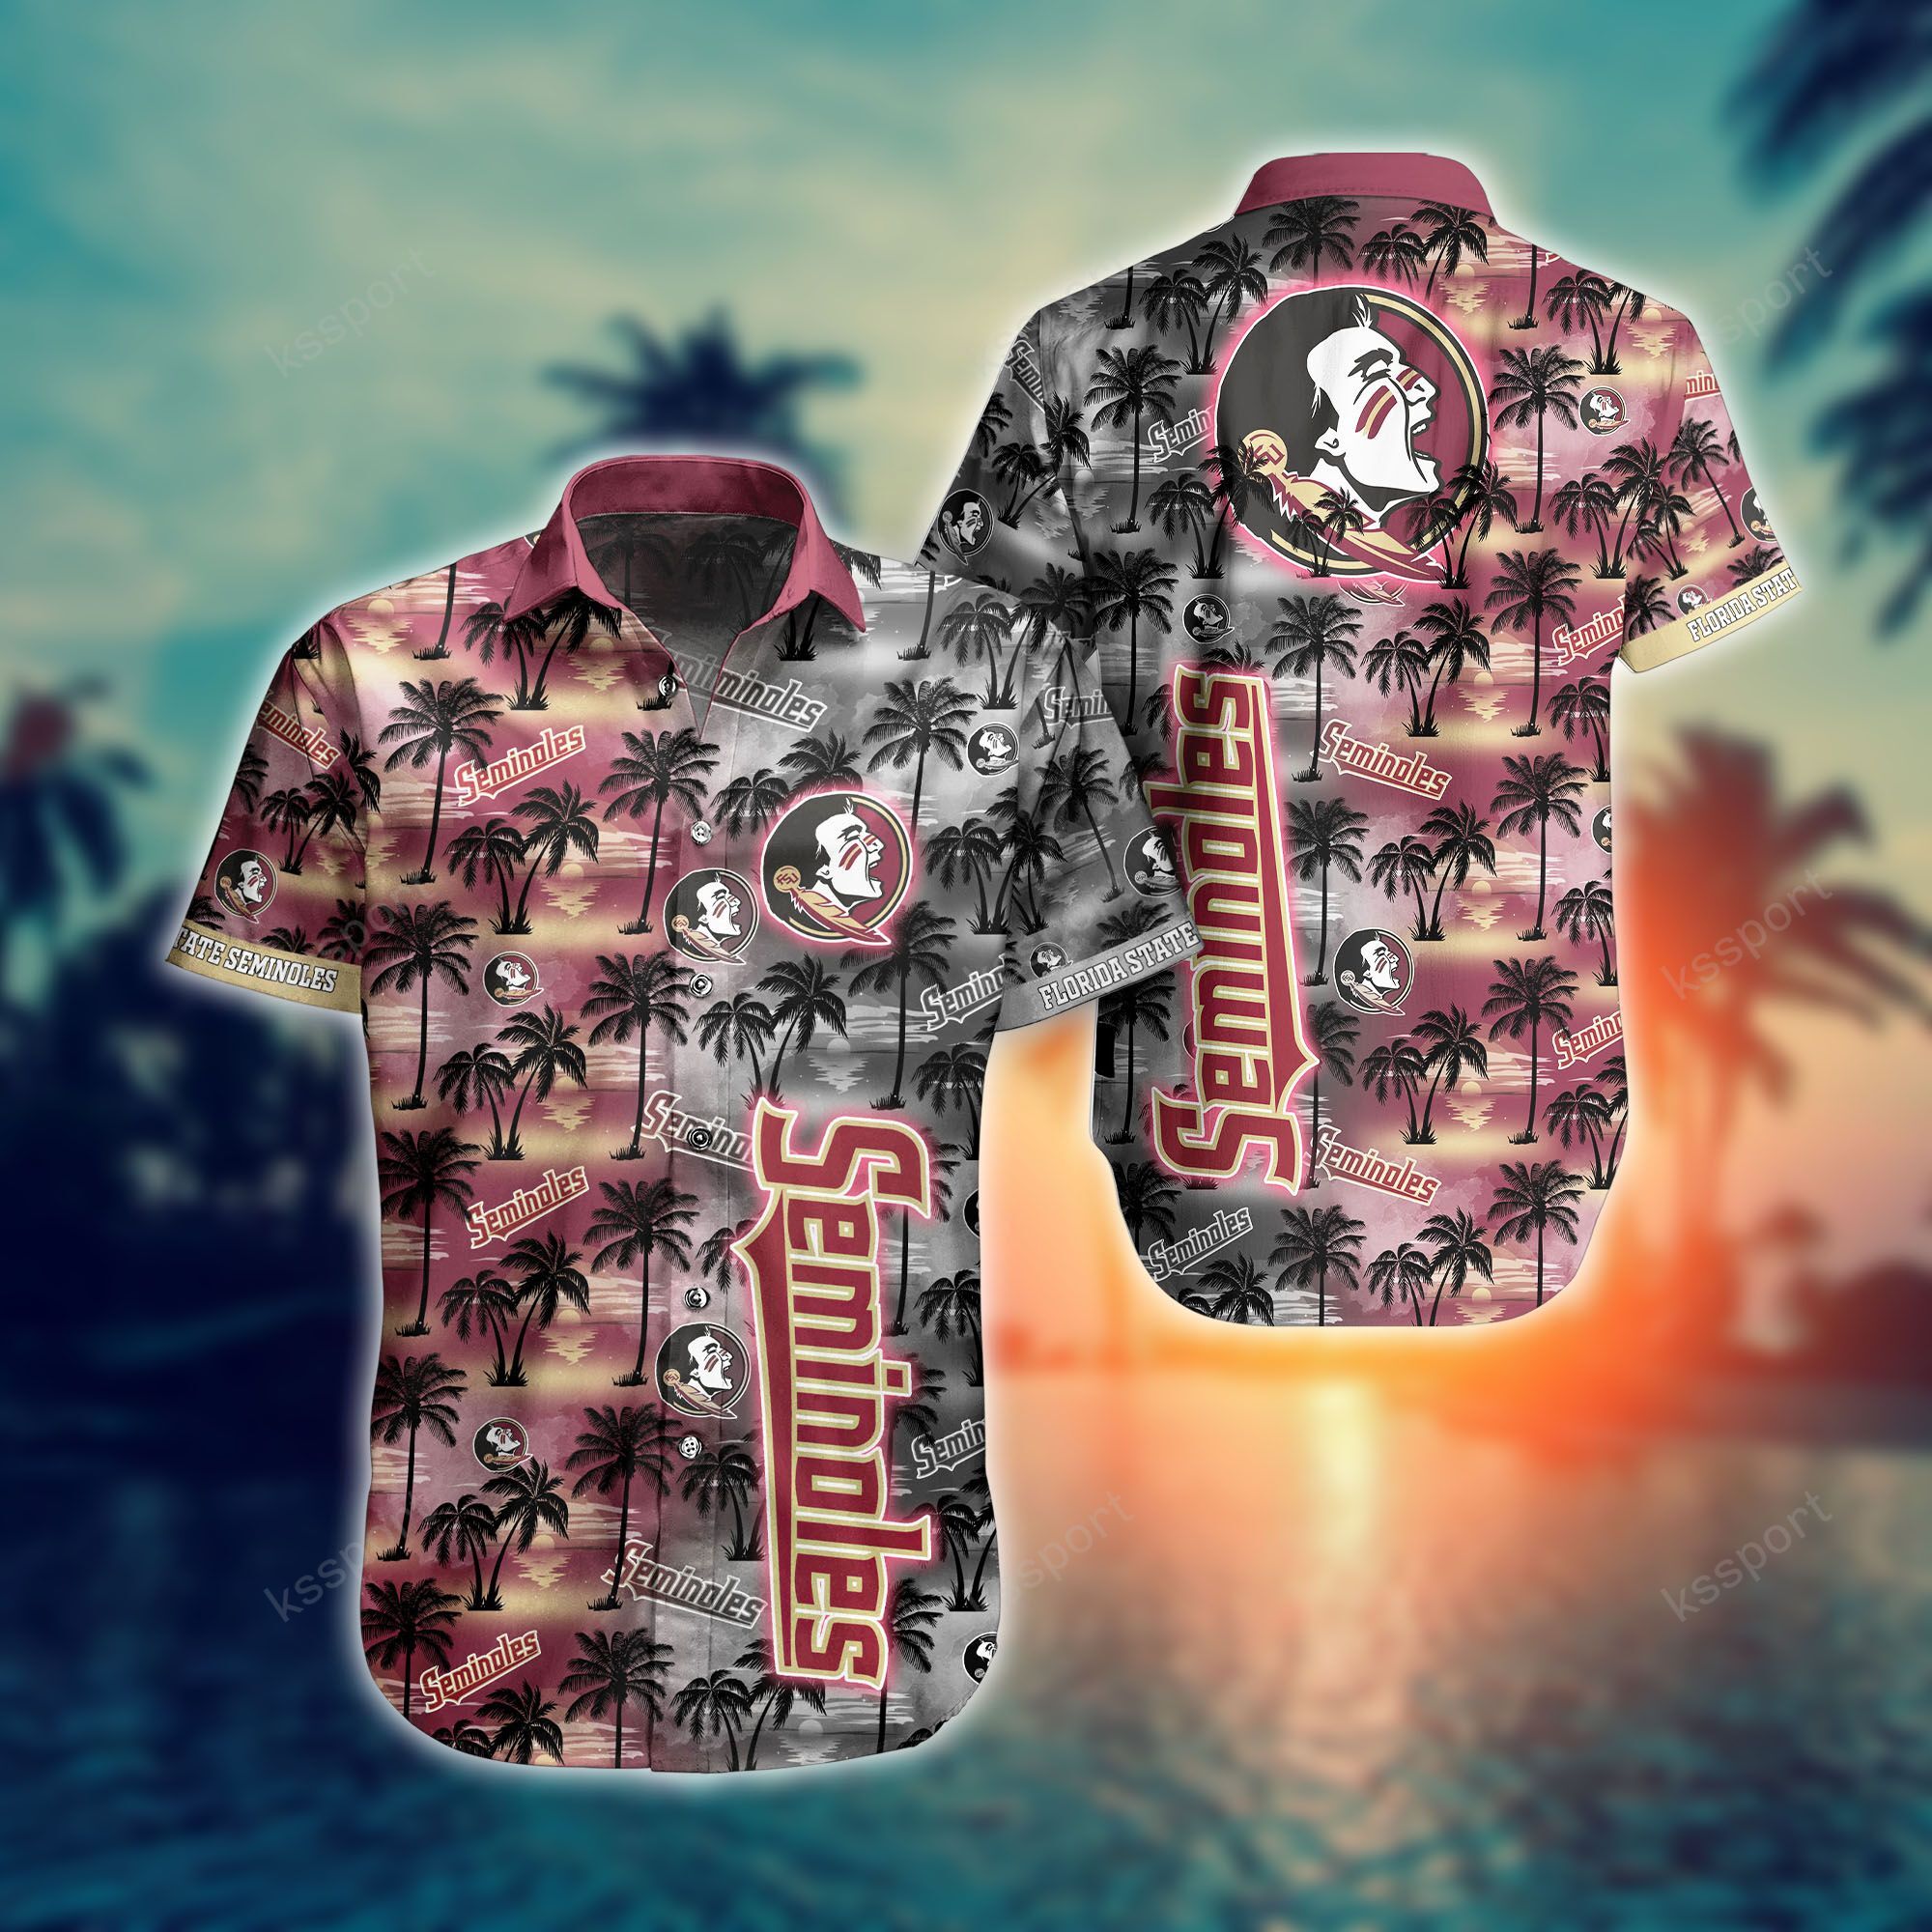 Treat yourself to a cool Hawaiian set today! 21